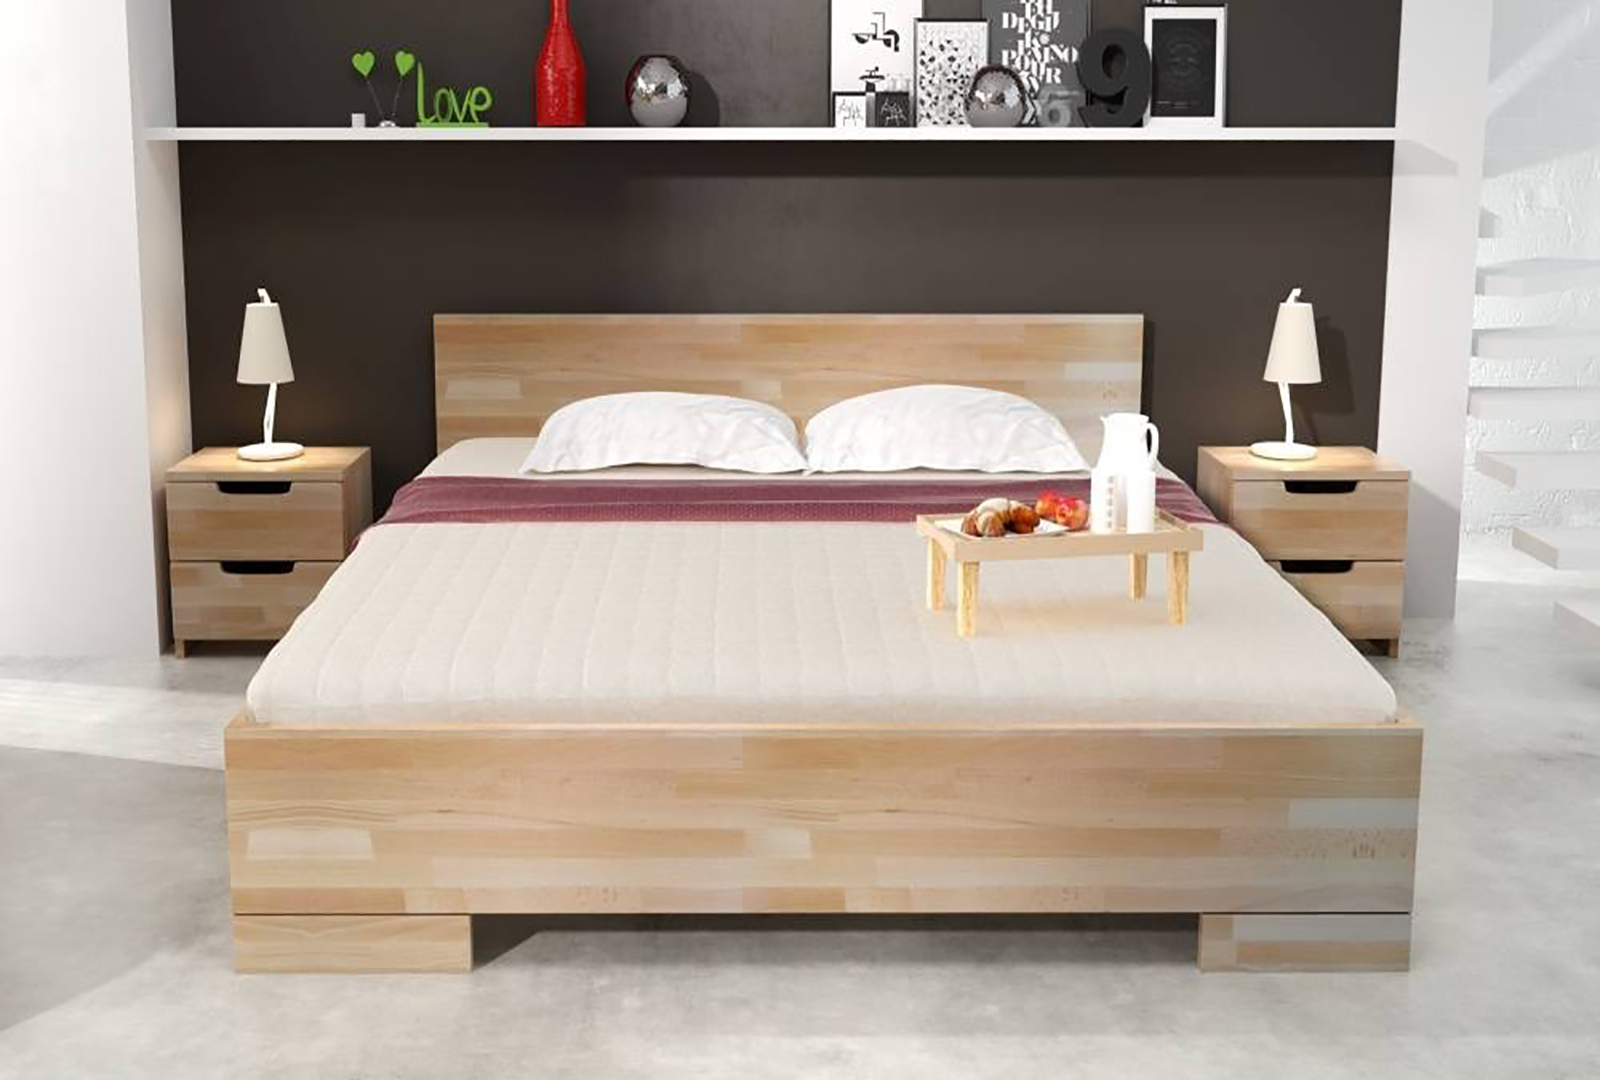 WOODEN BEECH BED WITH A BOX FOR BEDDING SKANDICA SPECTRUM MAXI & ST